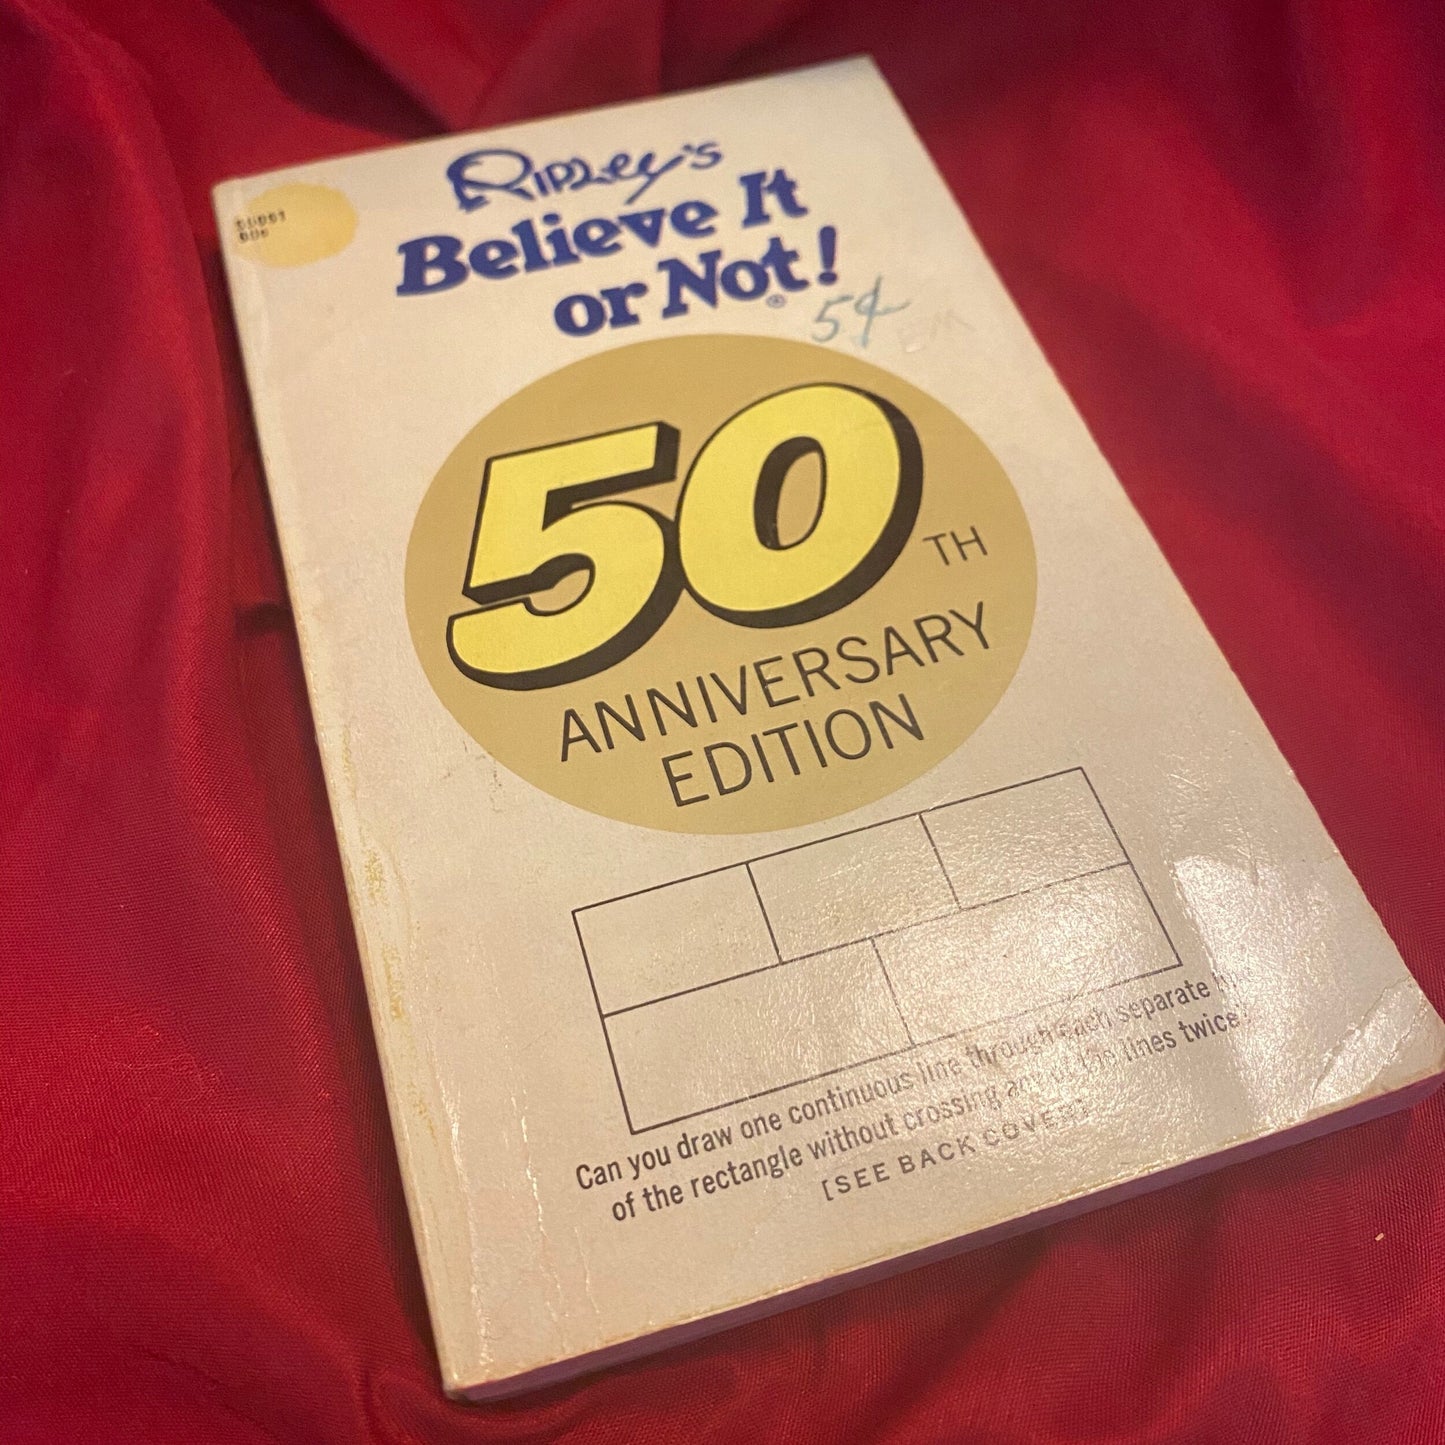 Ripley’s Believe It or Not! 50th Anniversary Edition